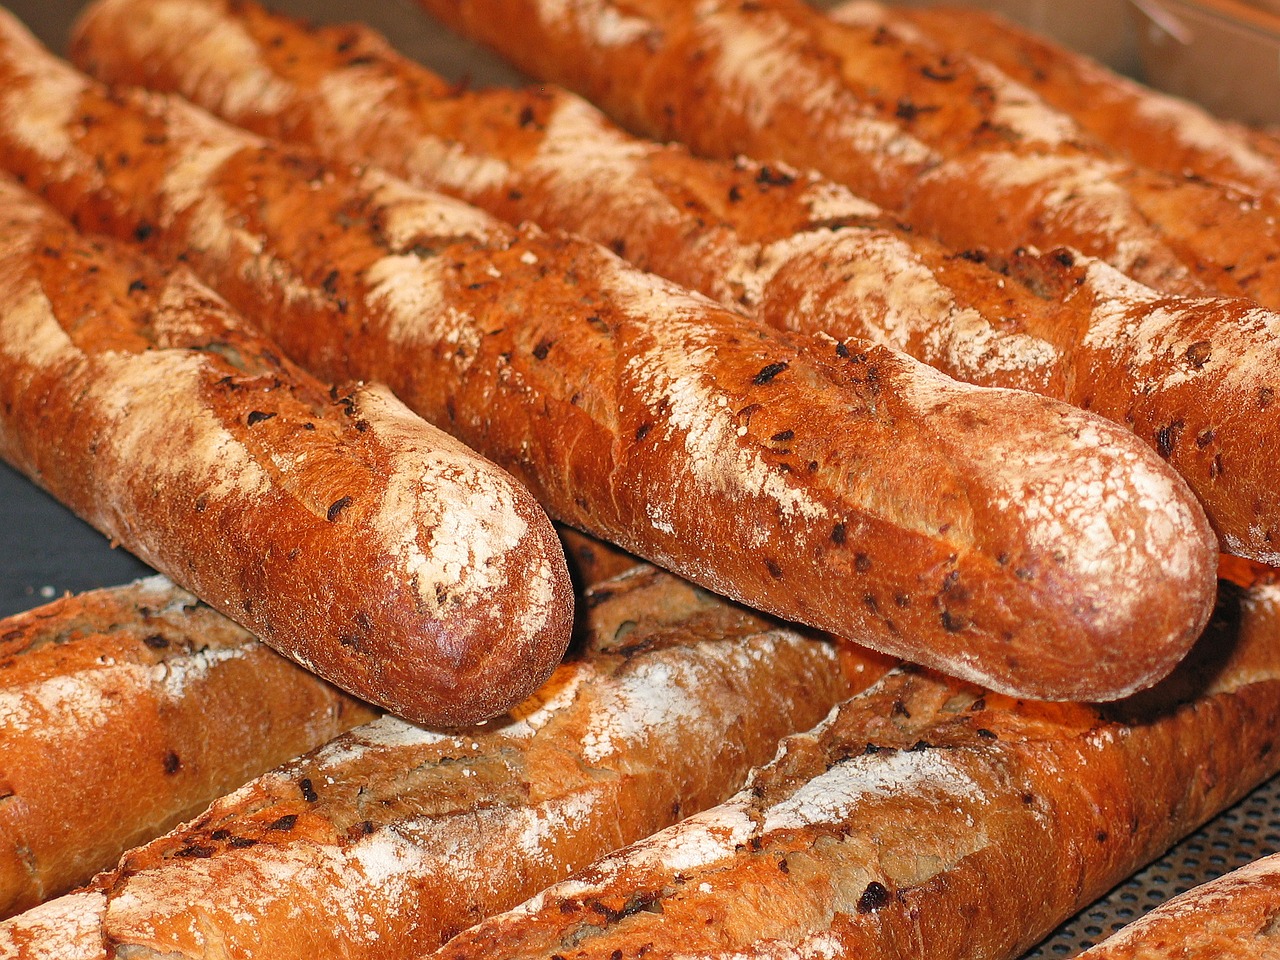 baguette bread baked goods free photo